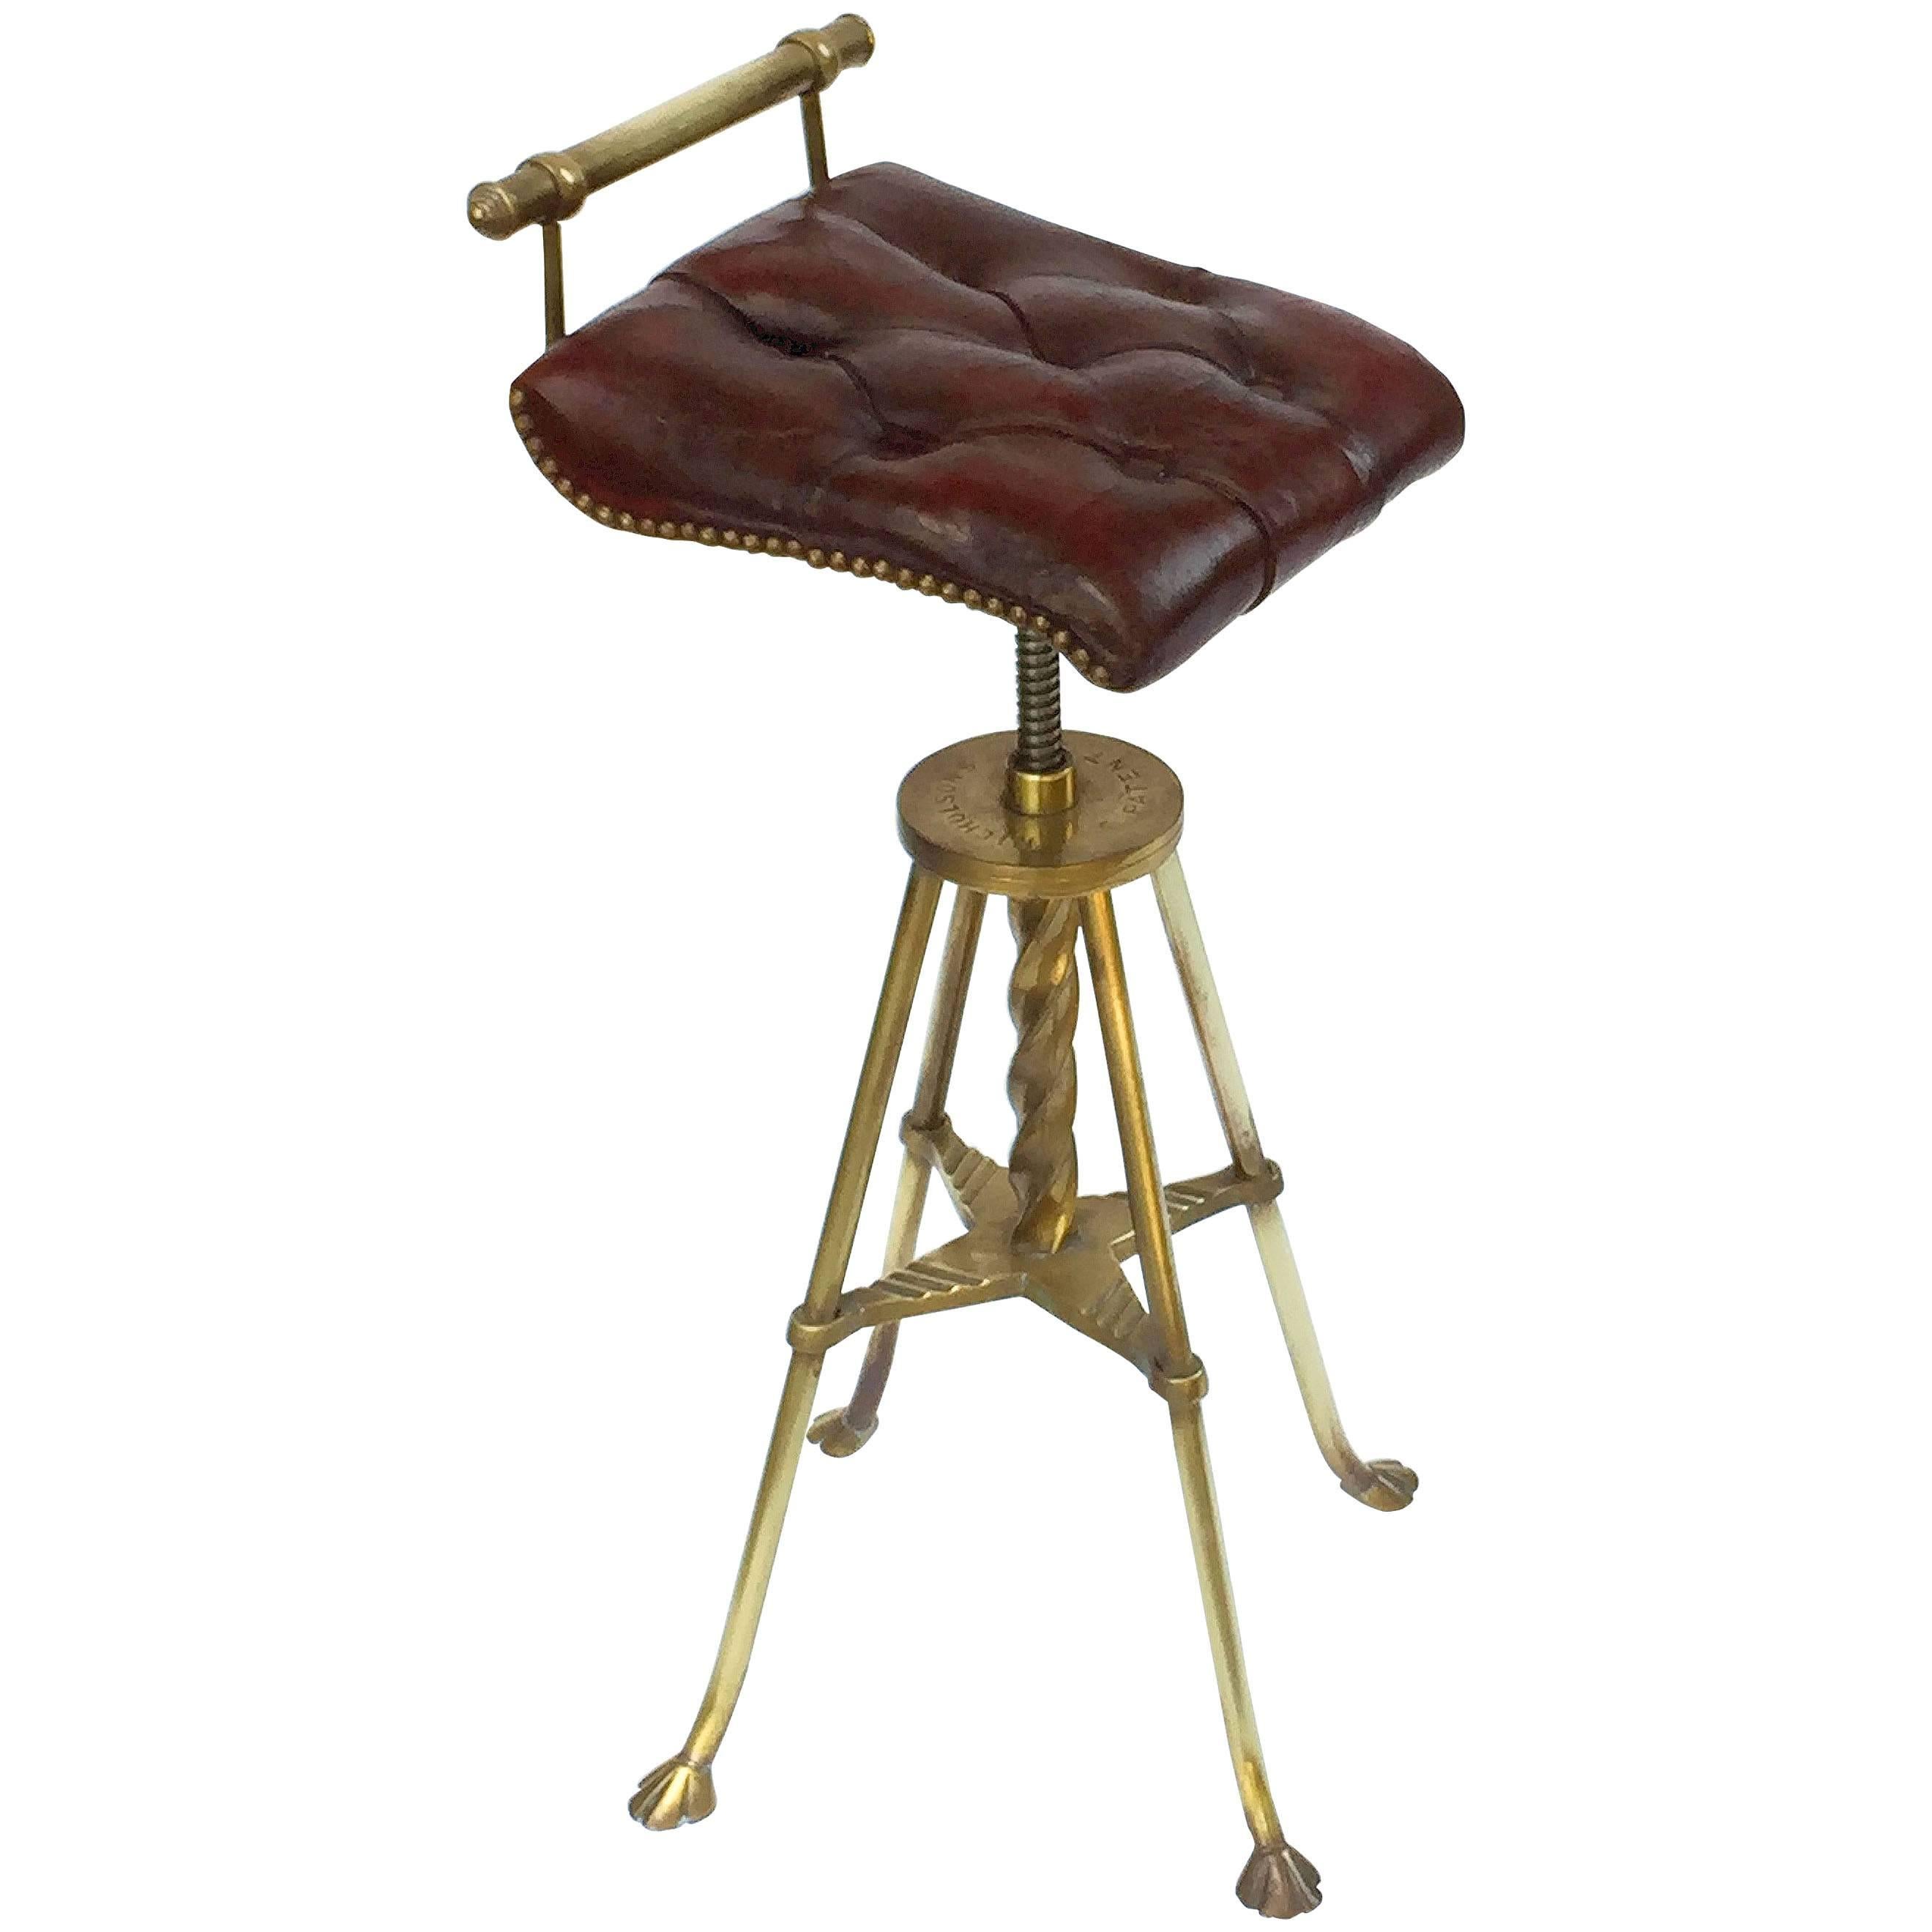 English Harpist's Stool of Brass with Original Button Leather Seat